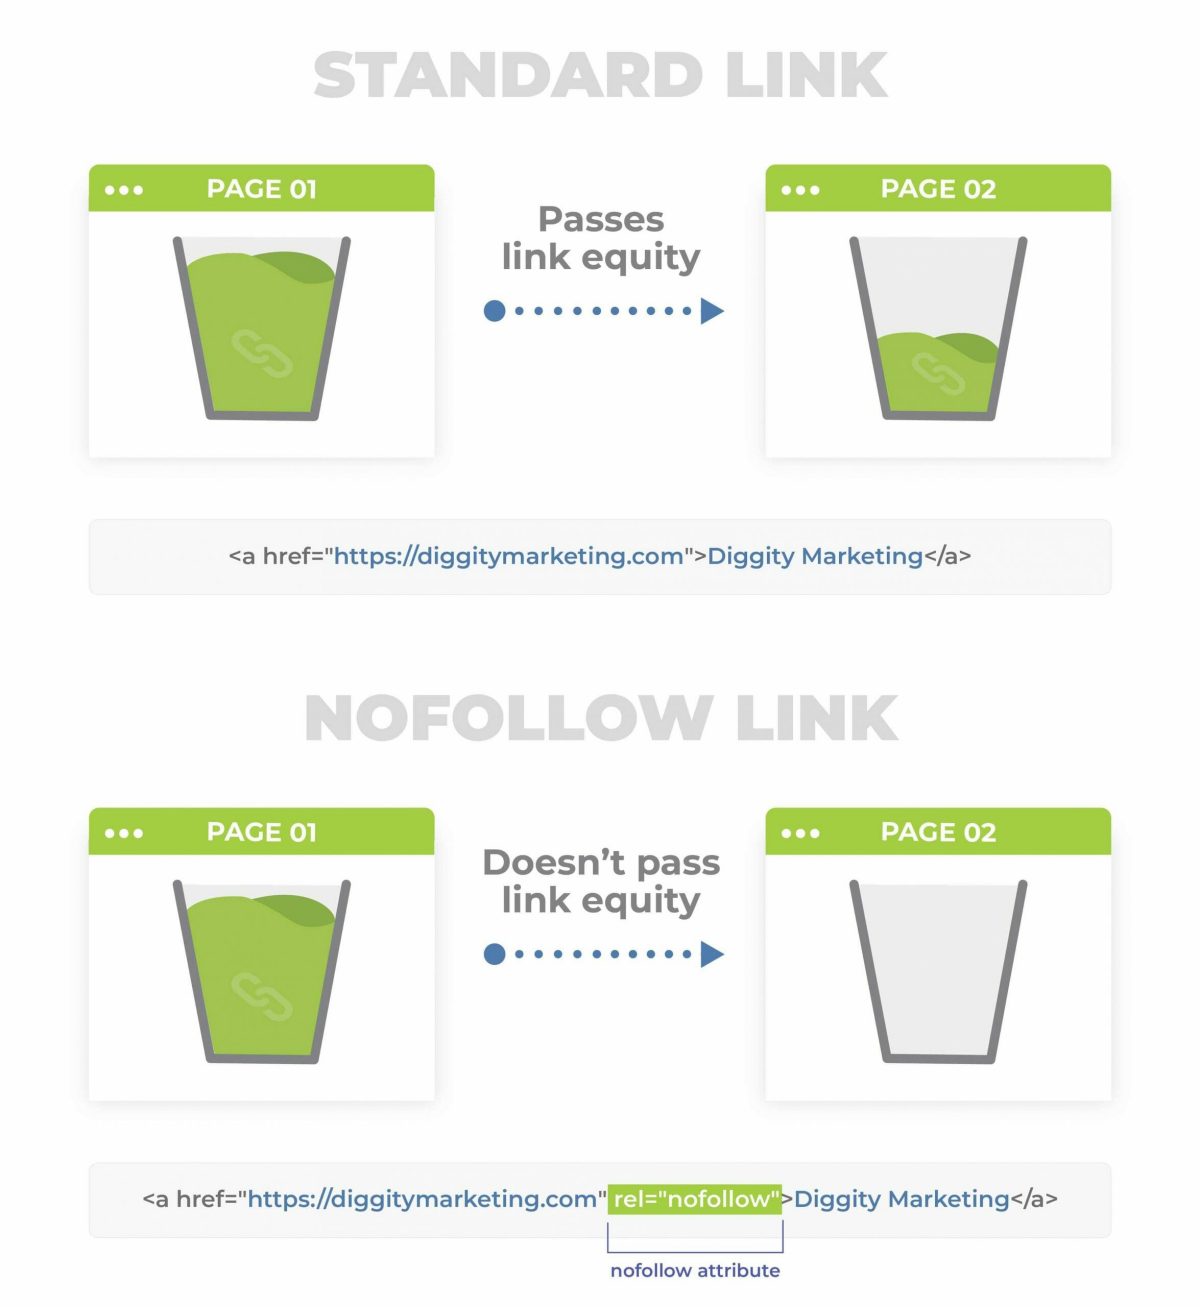 nofollow and standard link illustration